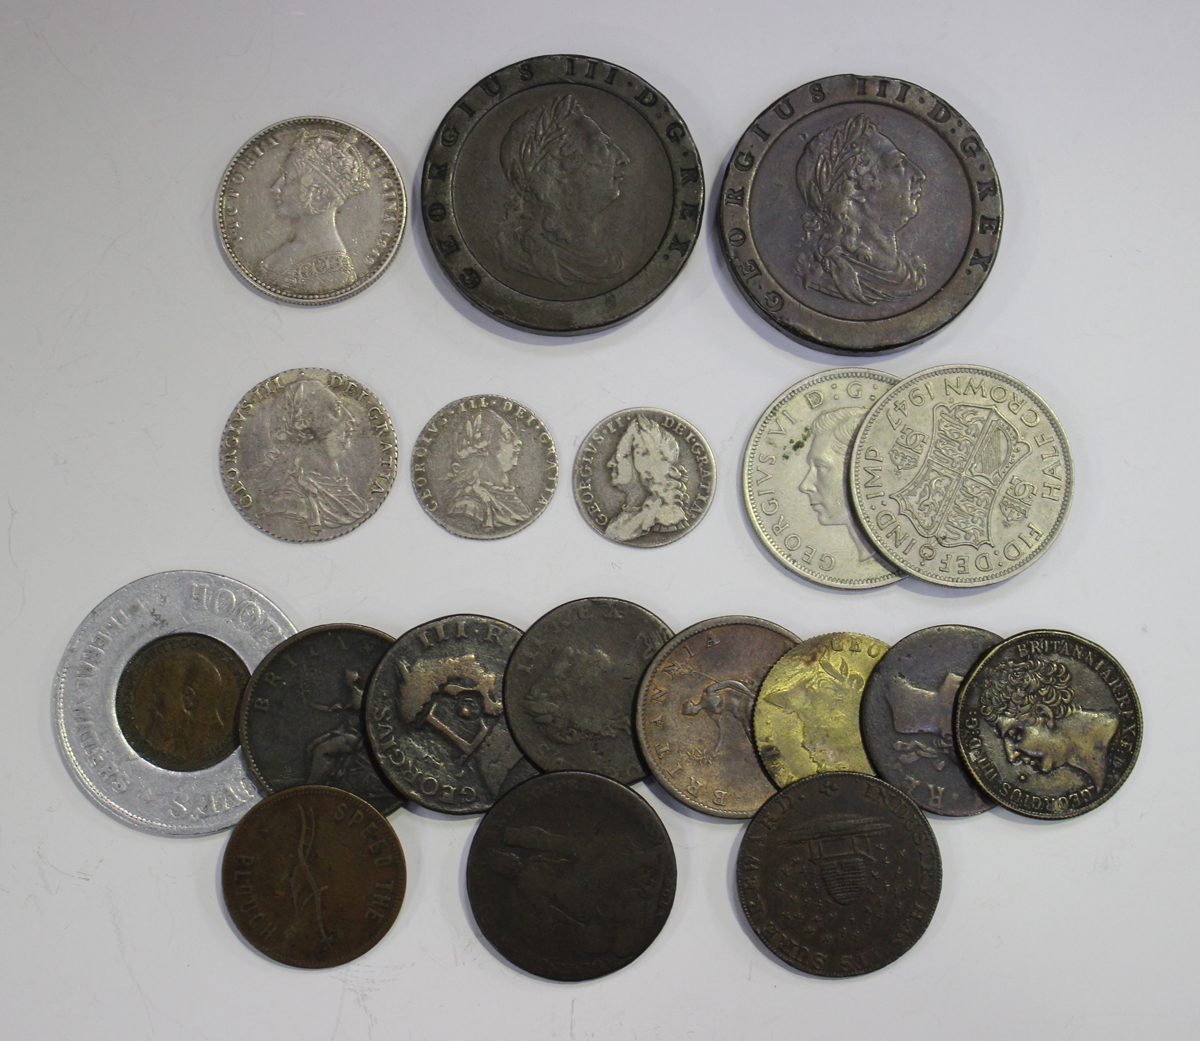 A group of British coinage and tokens, including a George II sixpence 1757, a George III shilling